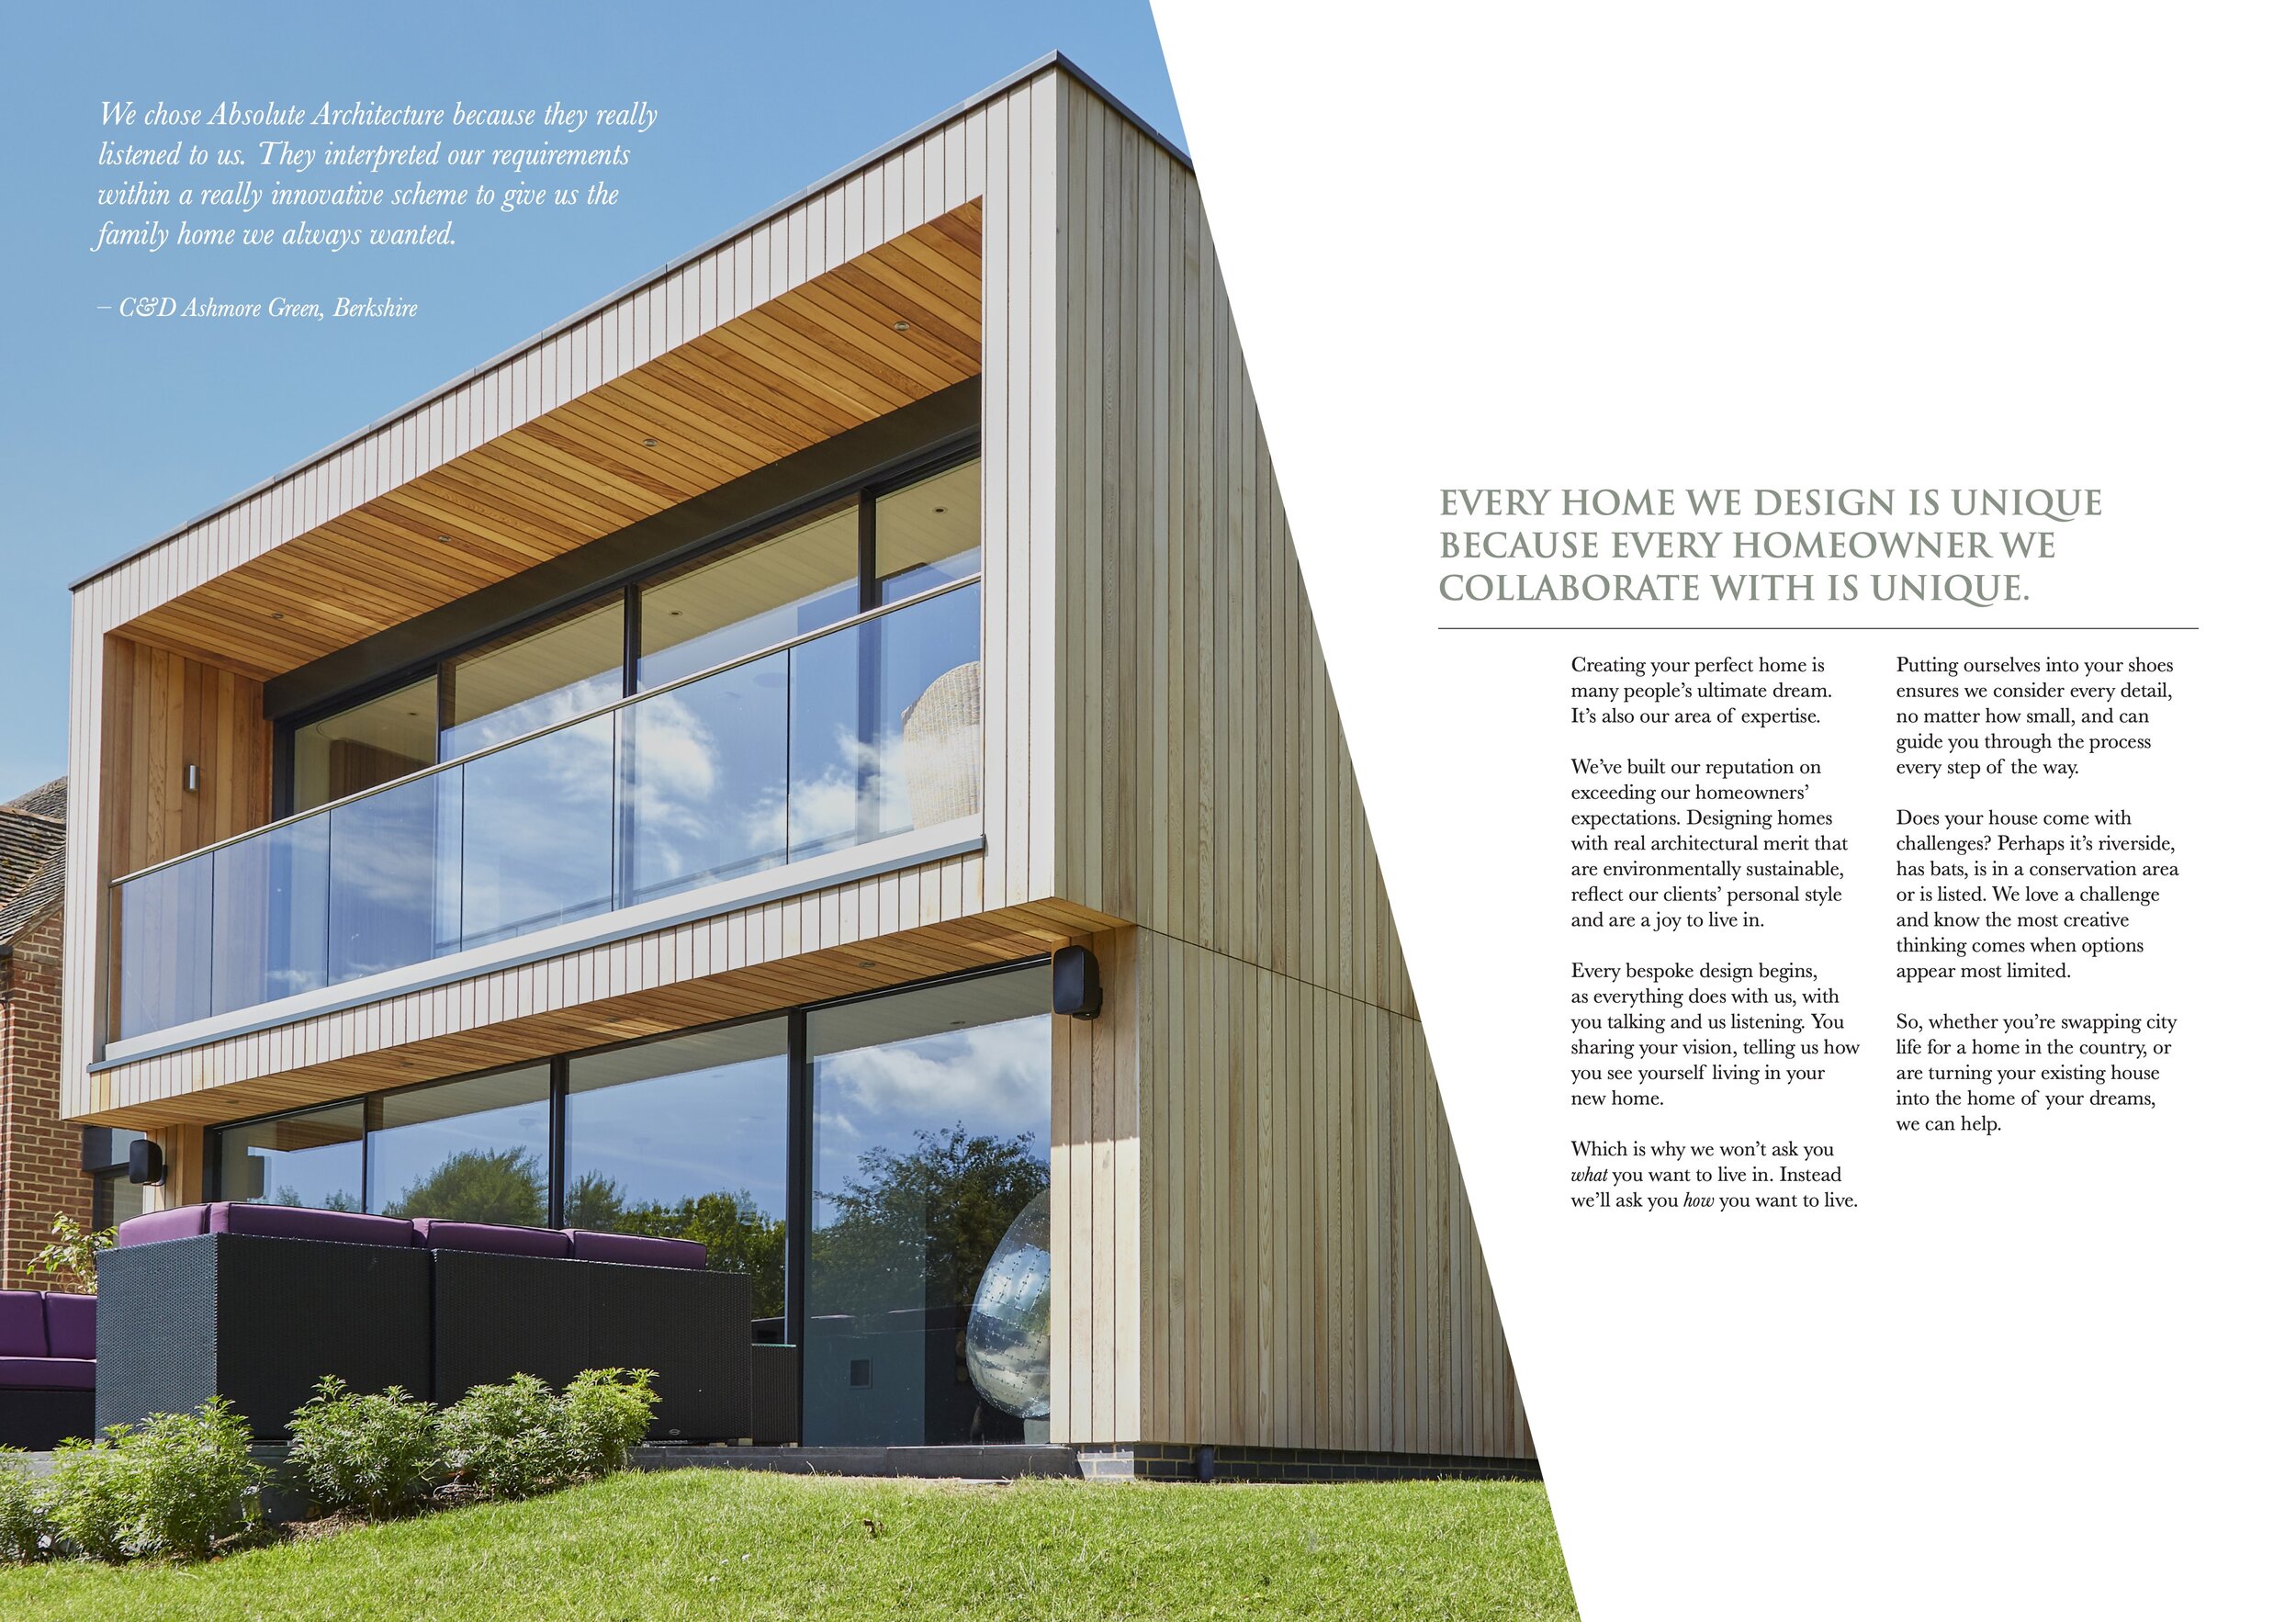 Absolute-Architecture_A4_Brochure_p5-about-power-of-words-copywriter.jpg